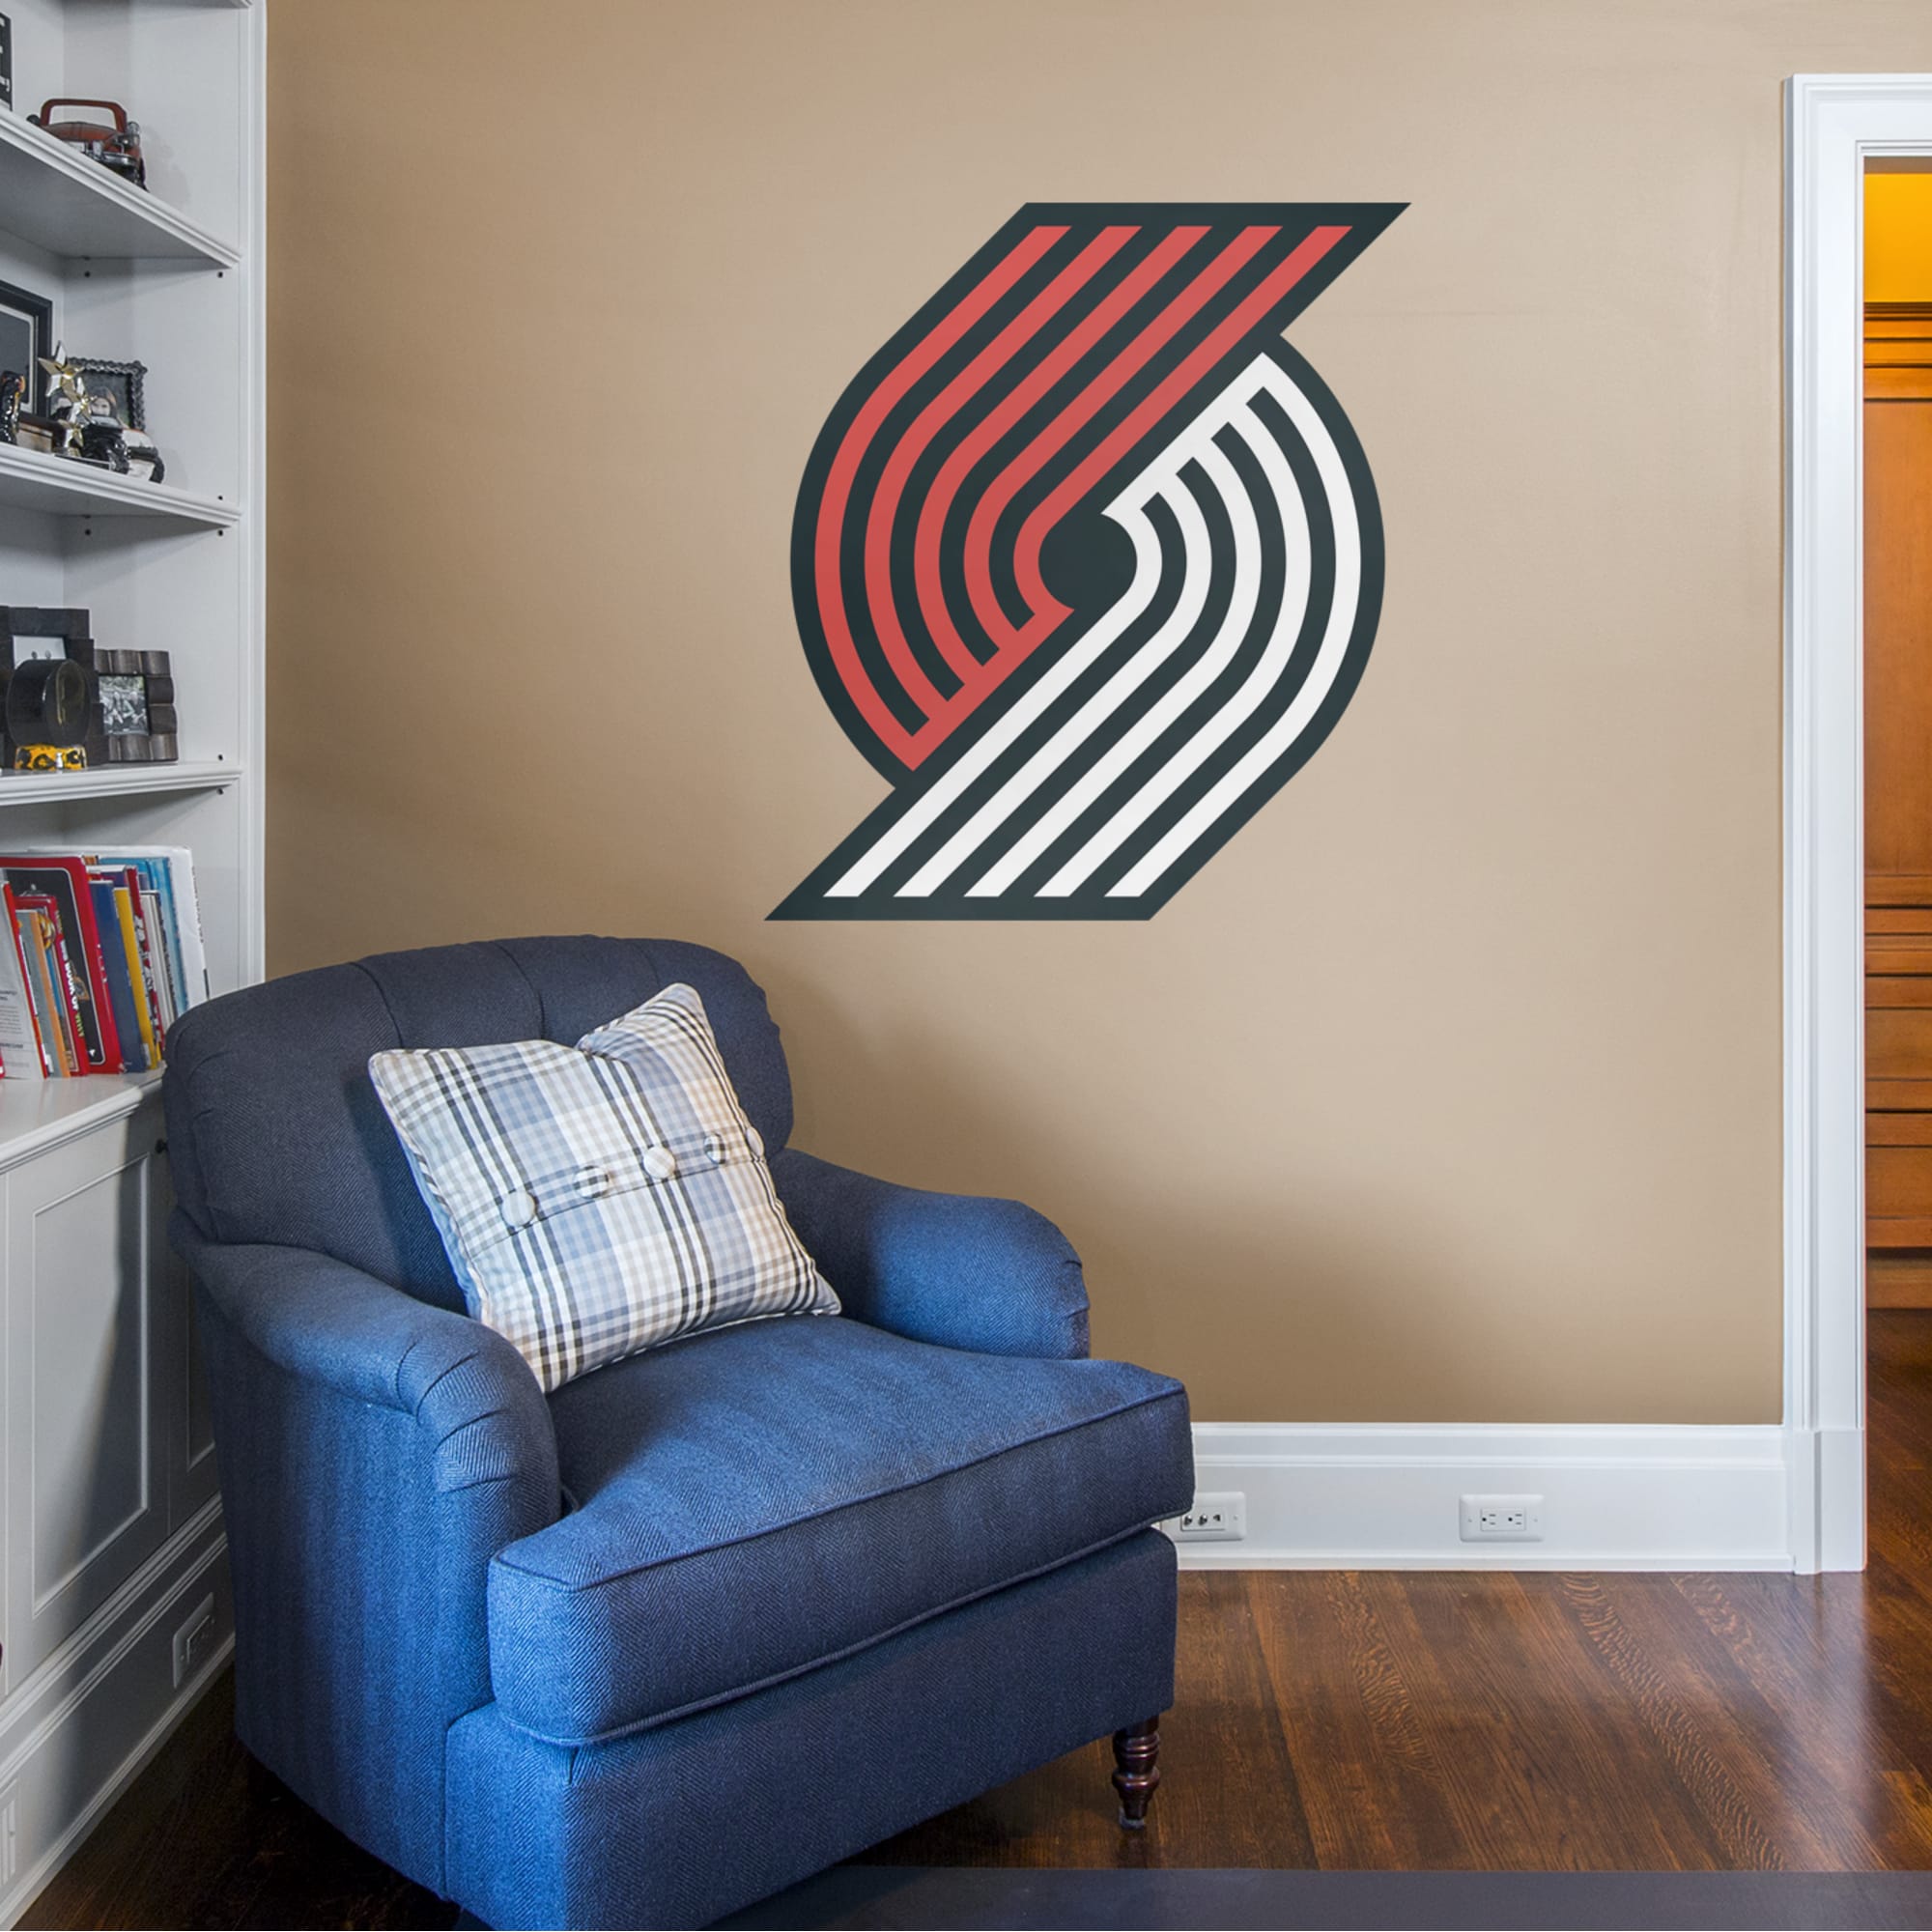 Portland Trail Blazers: Logo - Officially Licensed NBA Removable Wall Decal Giant Logo (38"W x 43"H) by Fathead | Vinyl